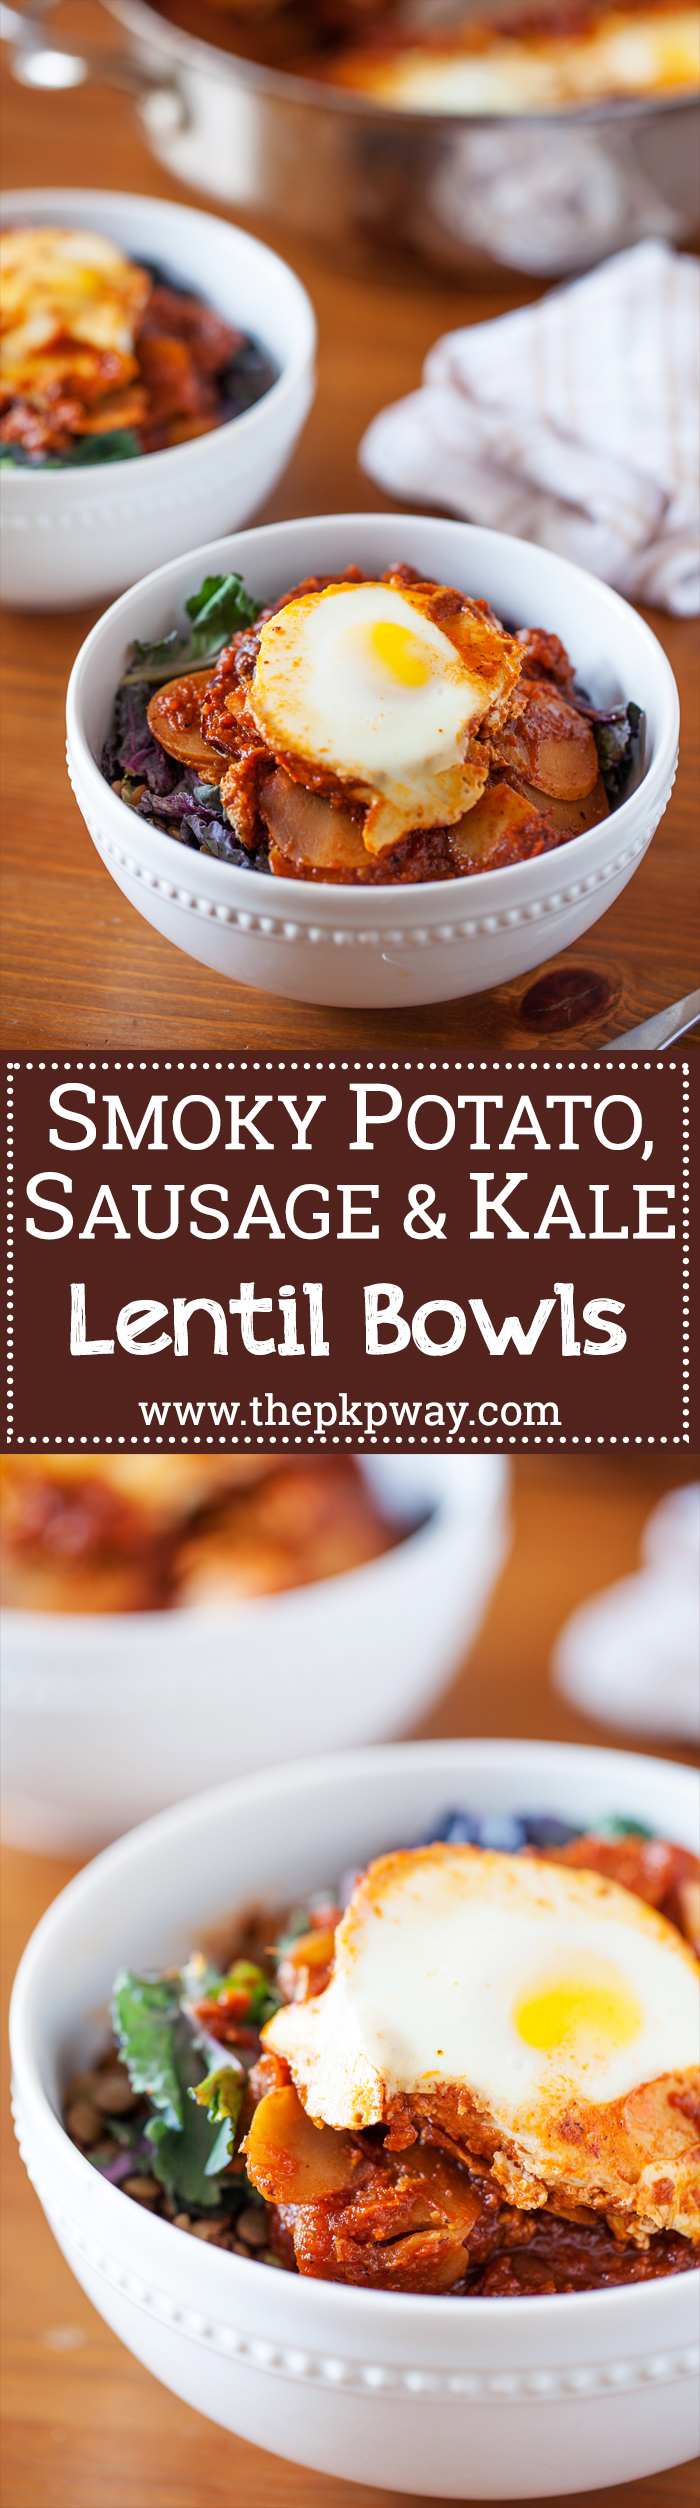 Smoky Potato, Sausage & Kale Lentil Bowl - Comforting, hearty, healthy, and cooks in one skillet!